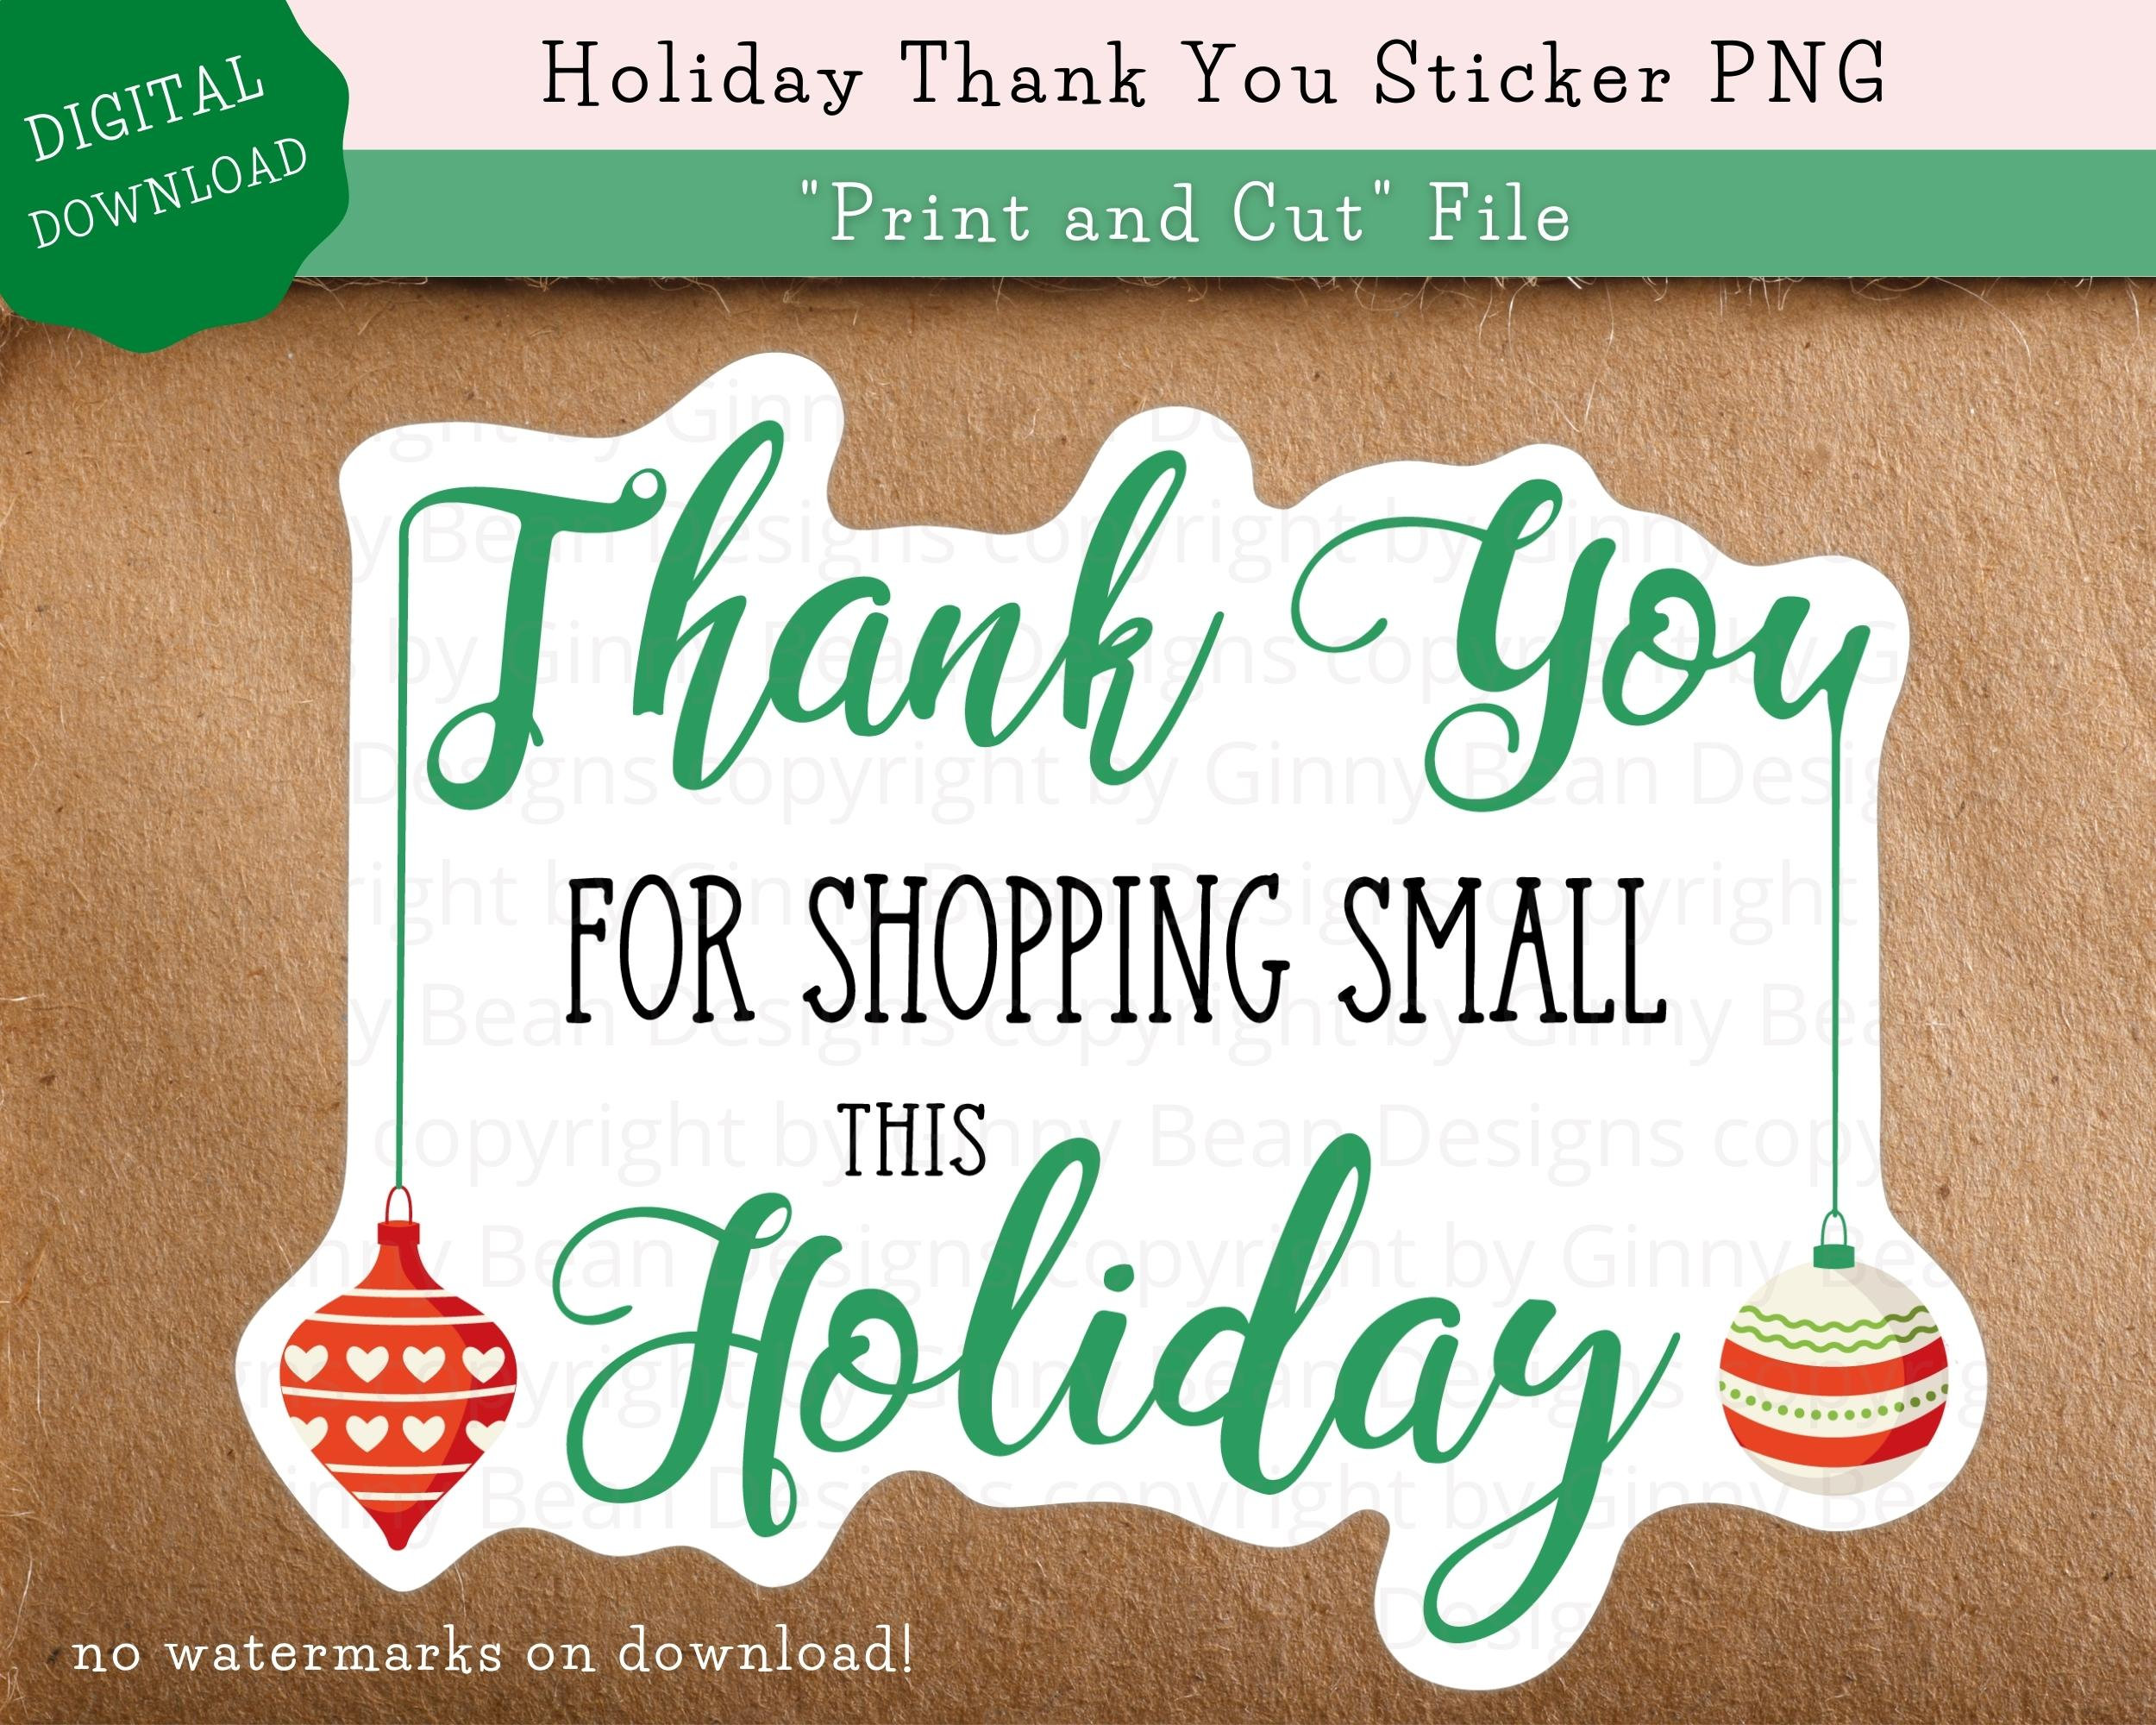 Christmas Stickers Holiday Sticker Gift Stickers Thank You for Shopping Small This Holiday Sticker 100 Thank You Sticker Sheet